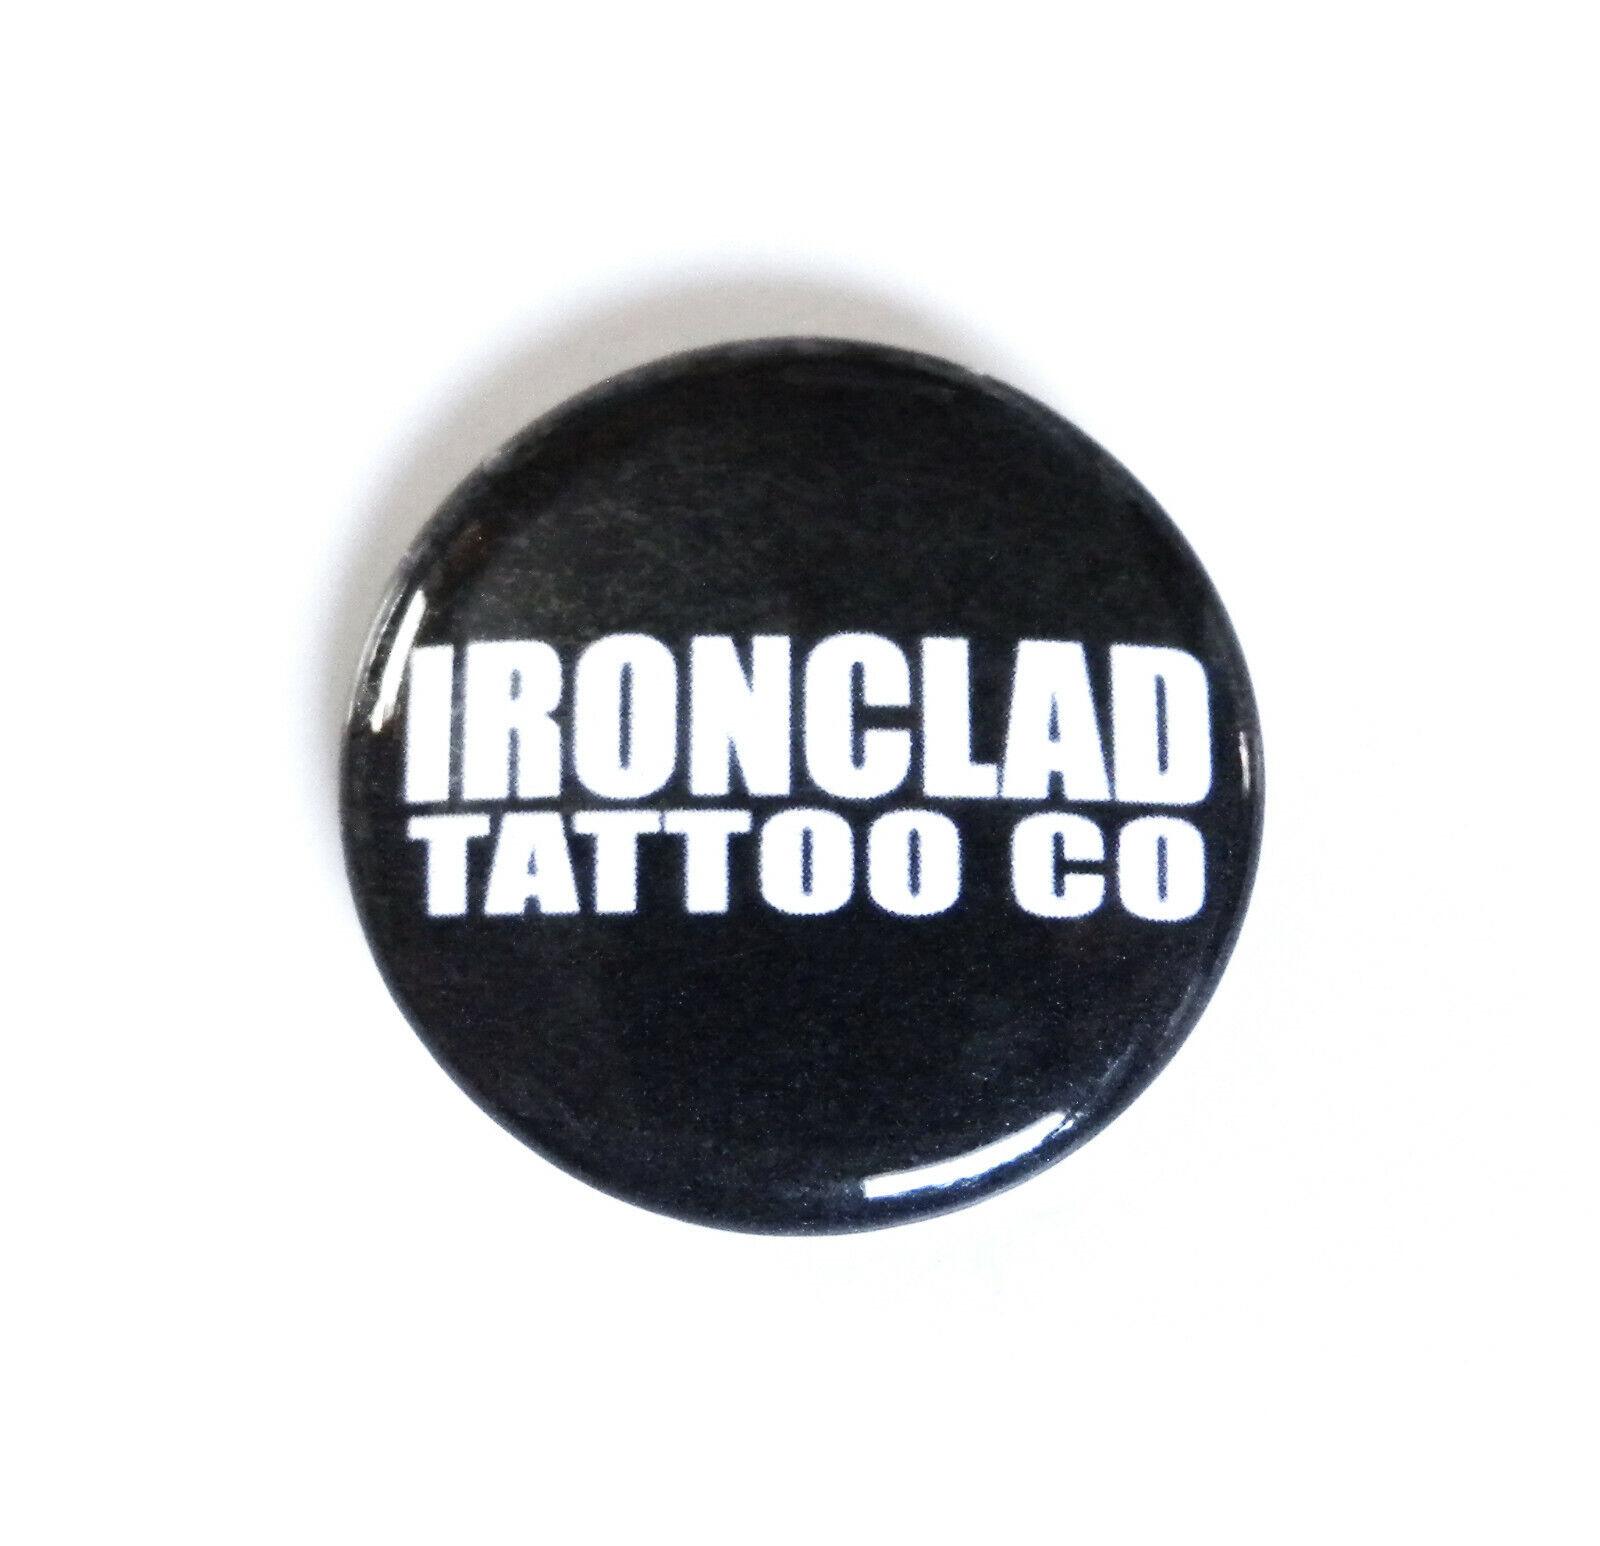 Ironclad Tattoo Co. Button Pin